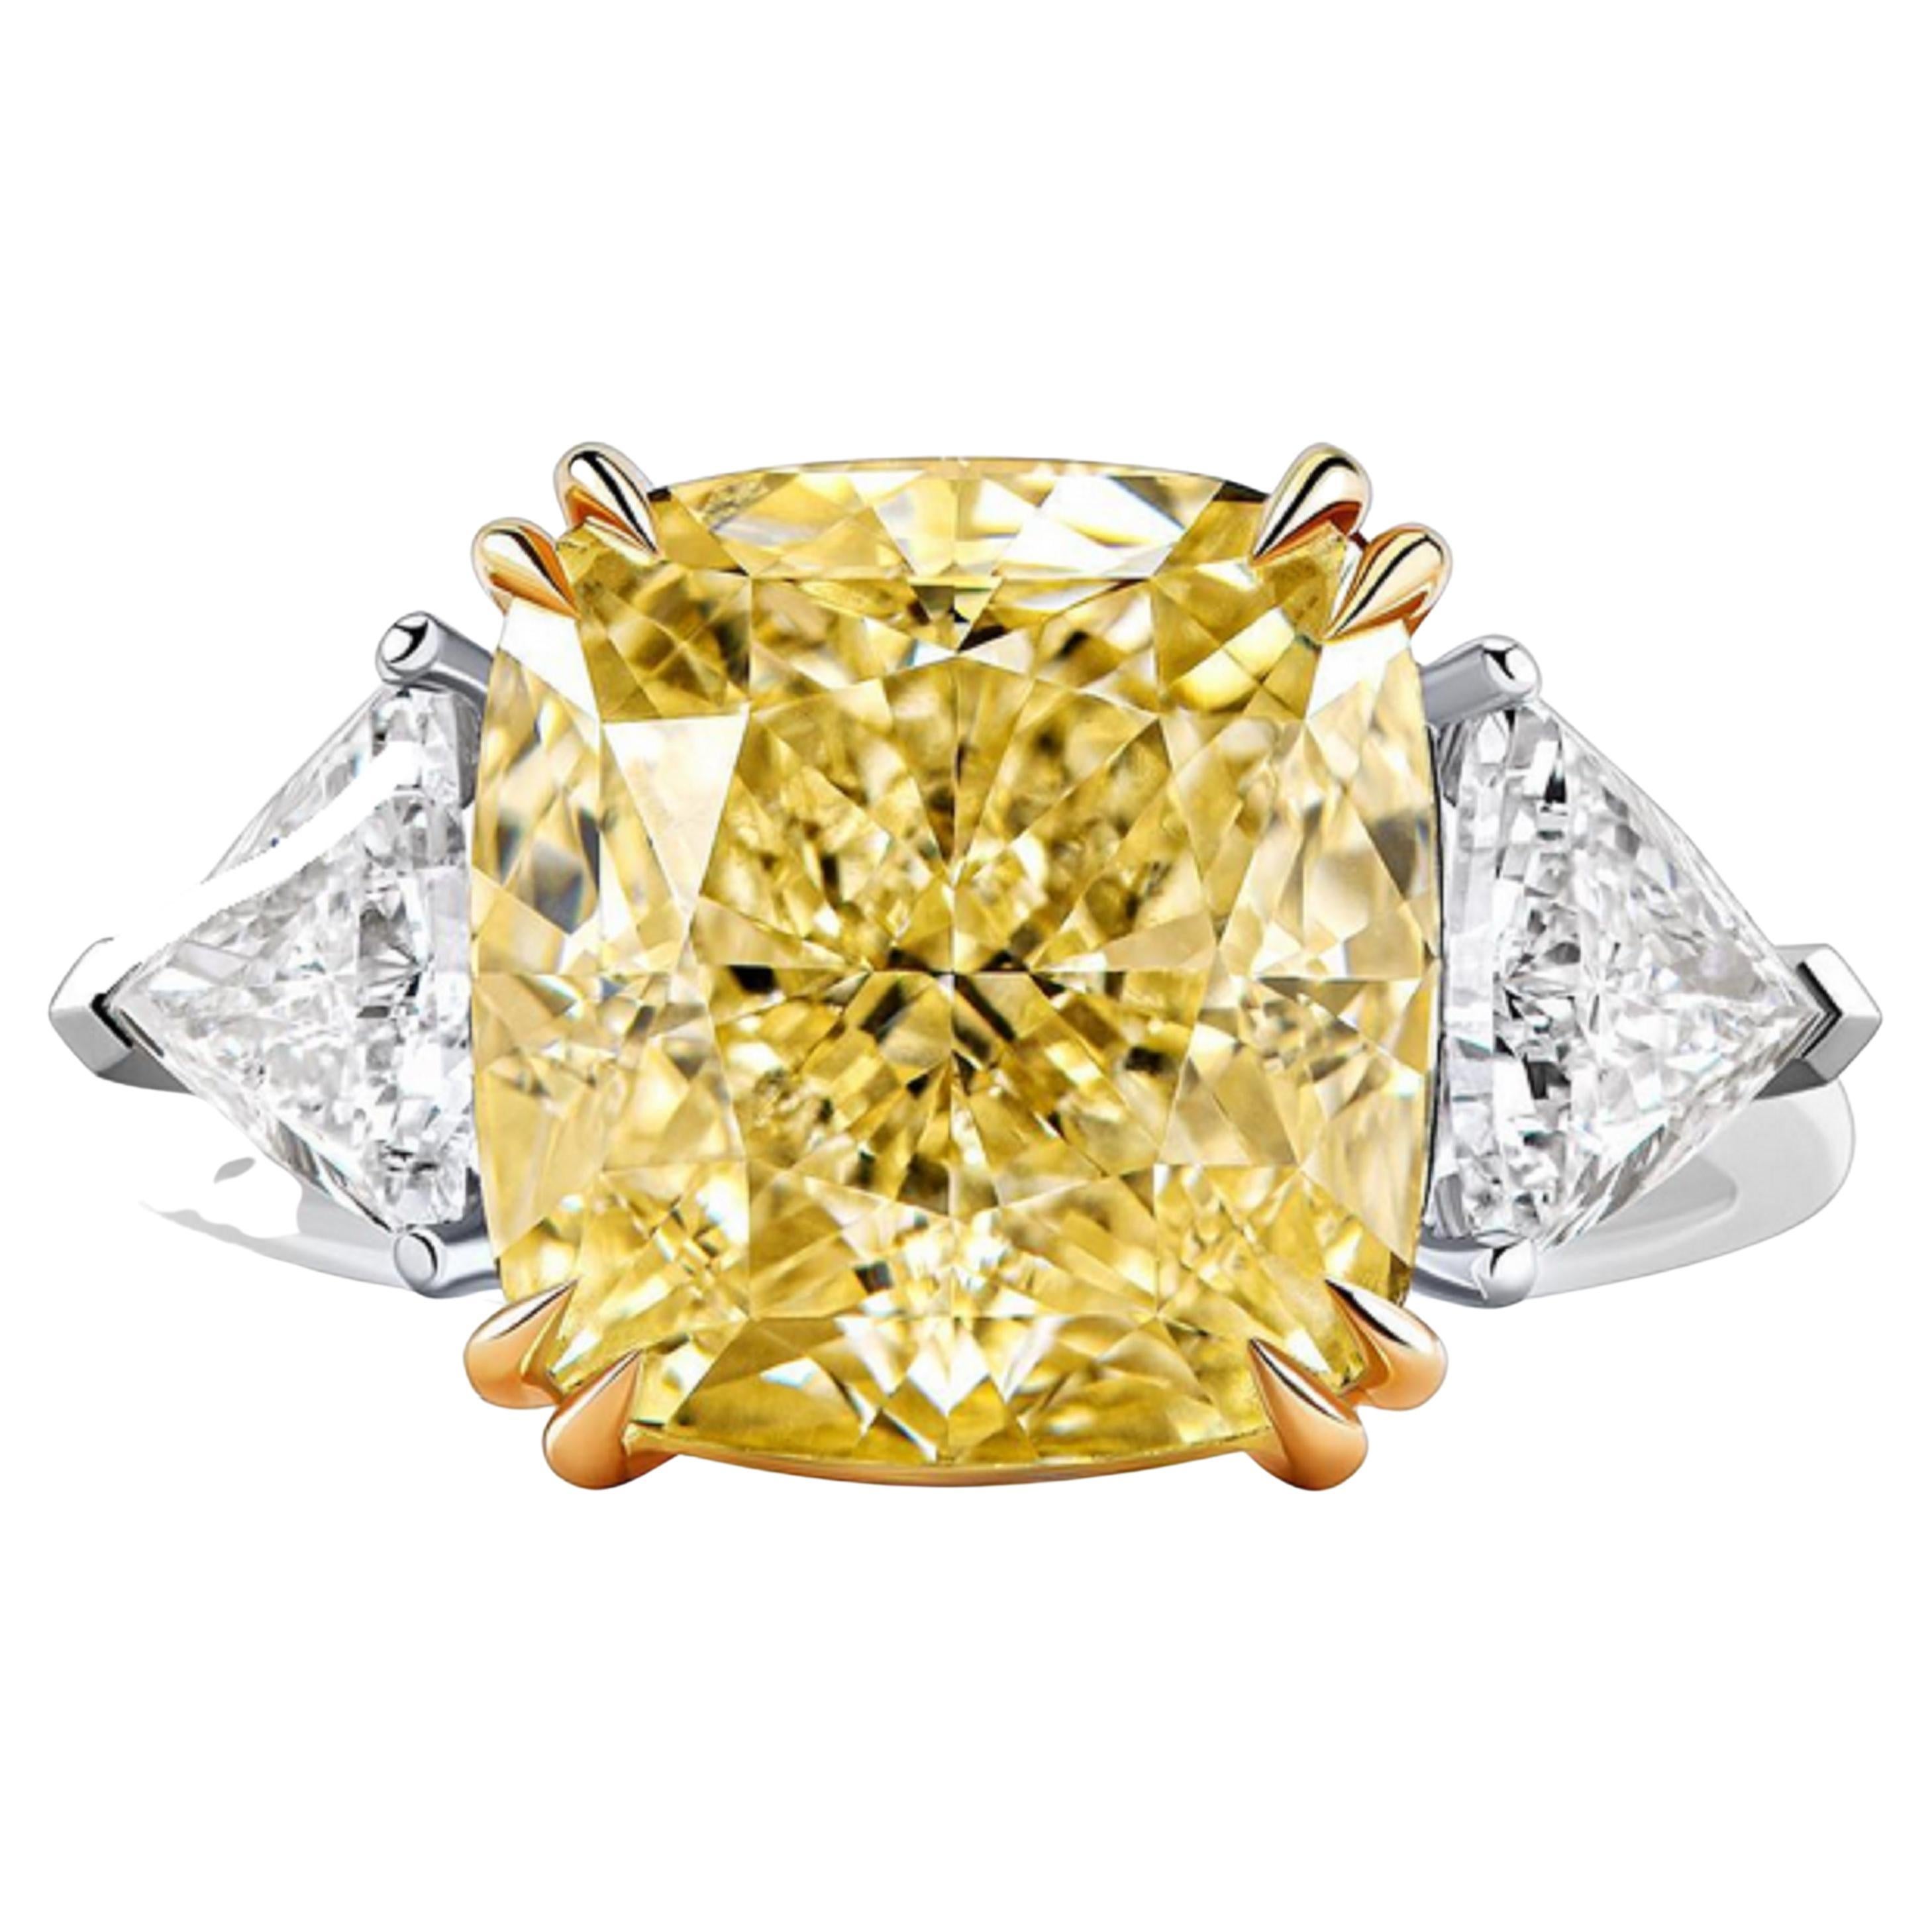  EXCEPTIONAL GIA Certified 5 Carat Fancy Intense Yellow Diamond Ring.

Make a statement with this breathtaking piece, adorned with a striking 5-carat yellow diamond certified by the prestigious Gemological Institute of America (GIA). Meticulously